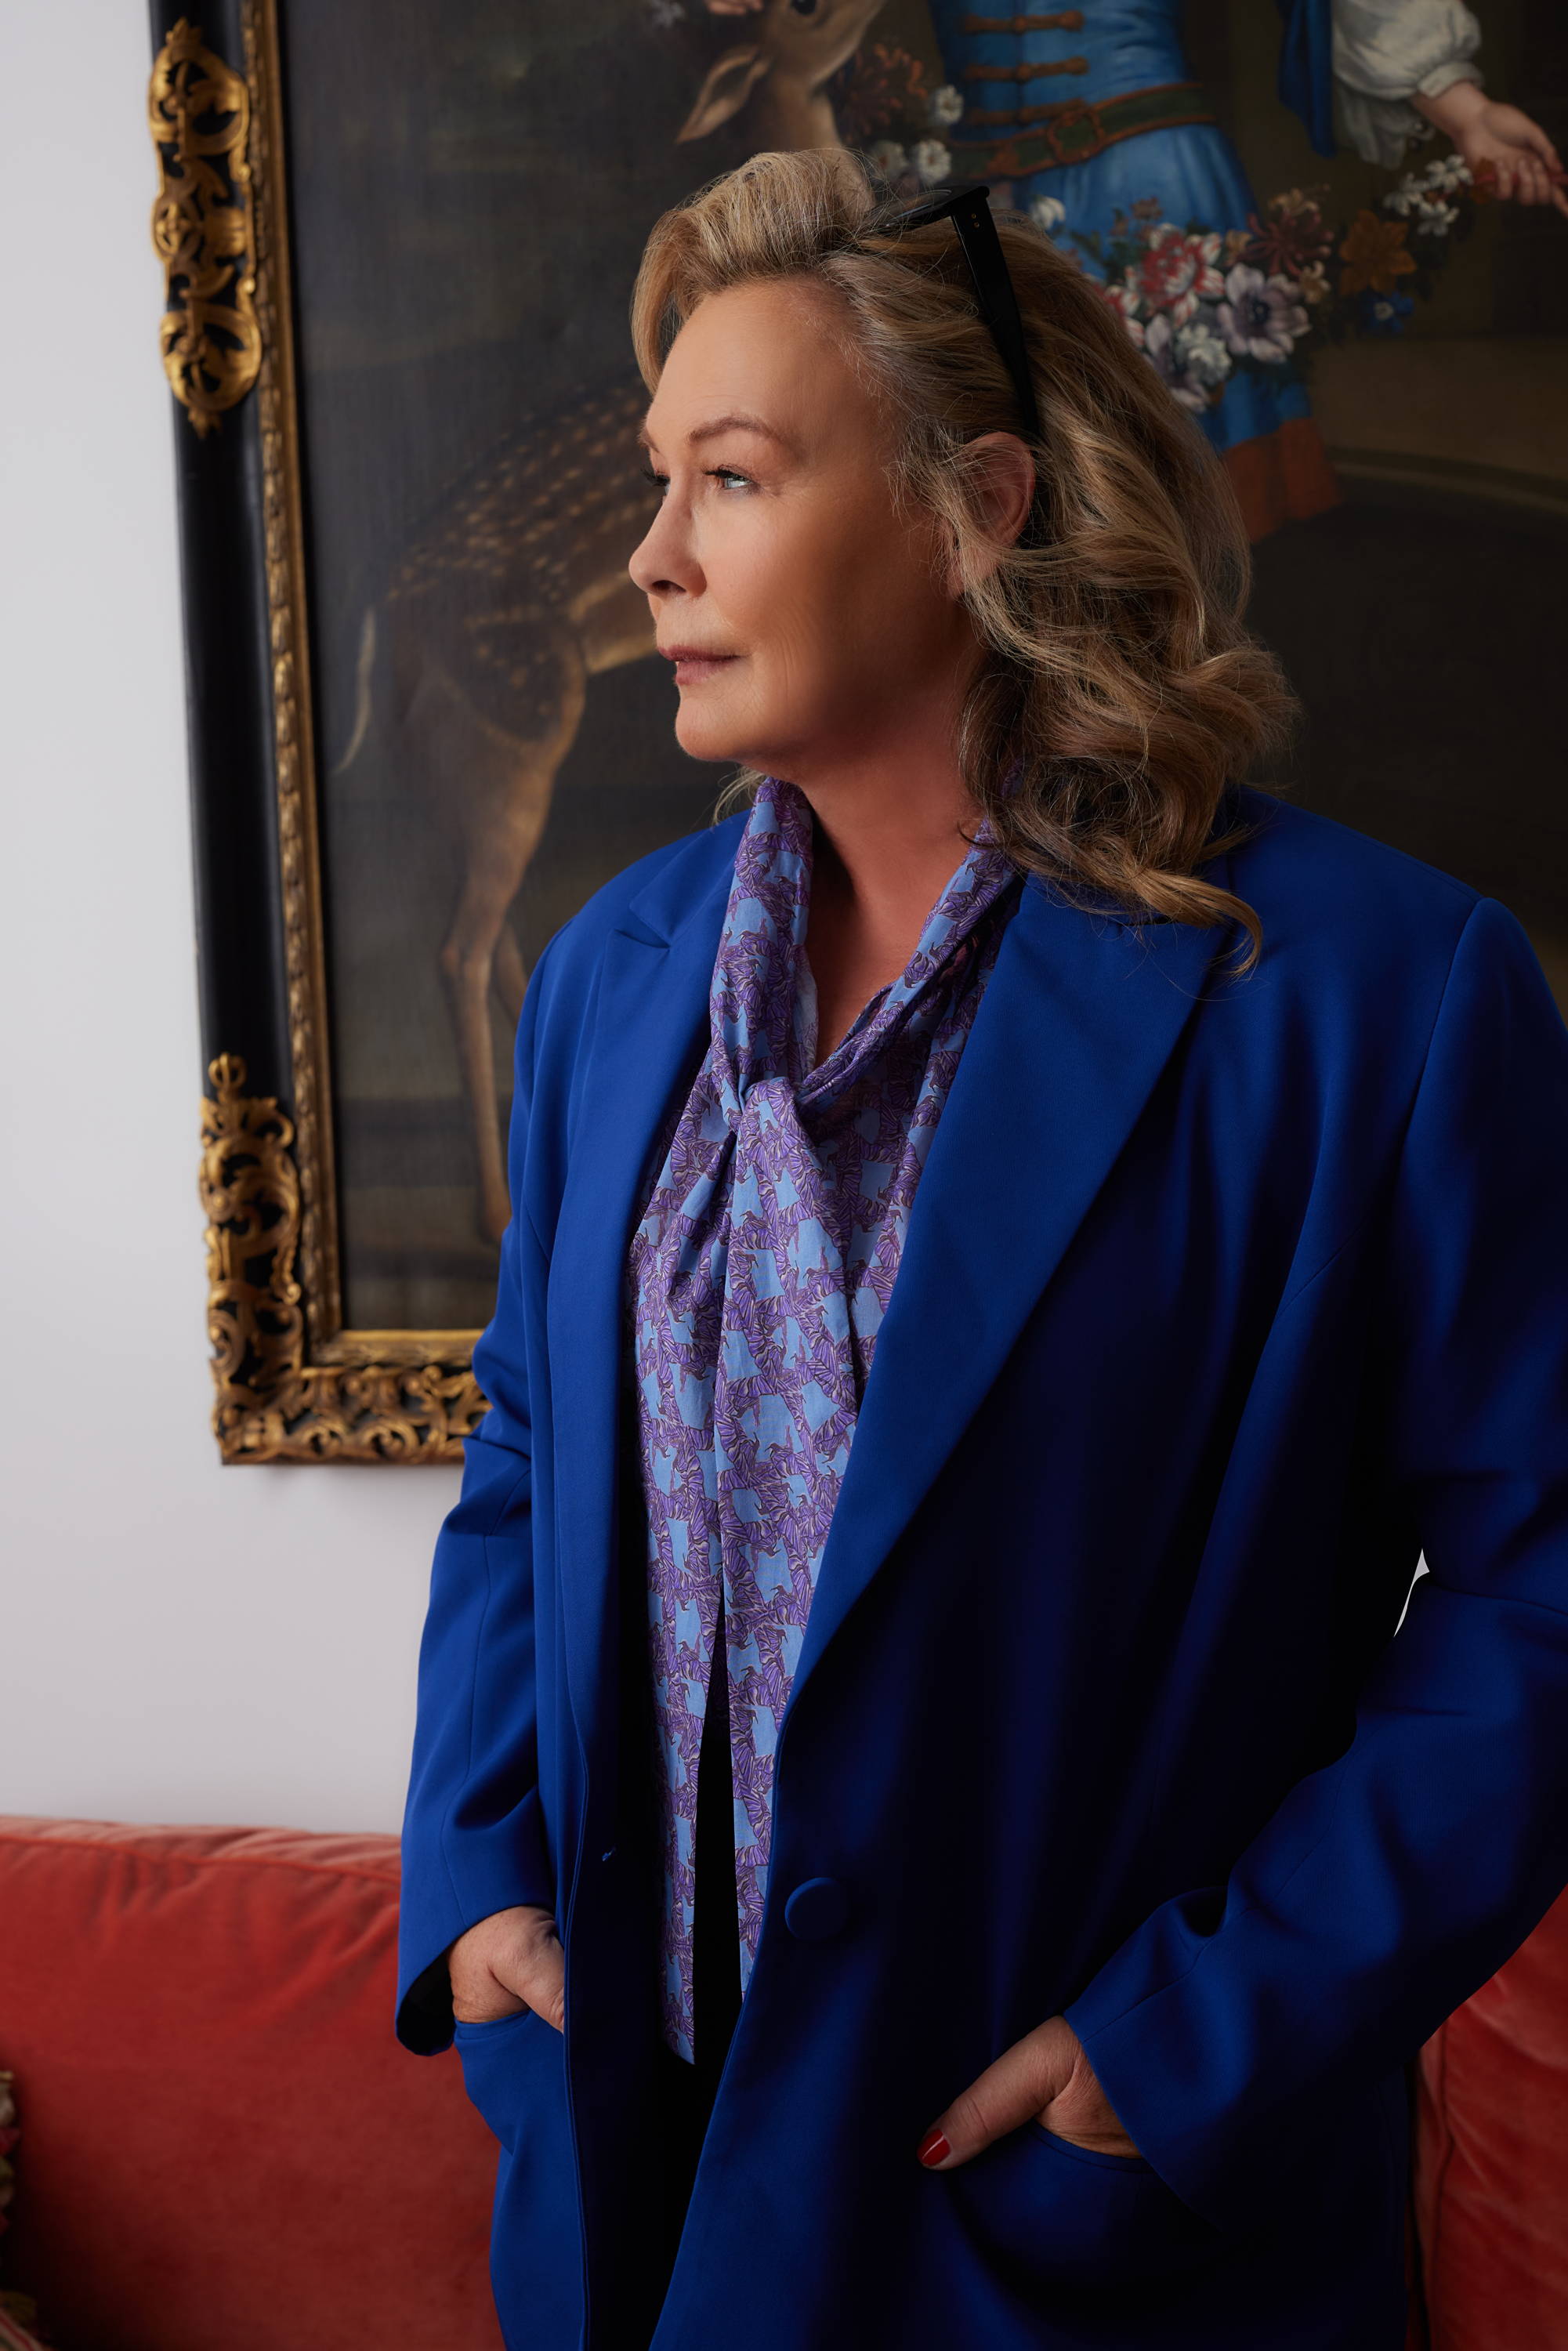 Ala Isham wearing blue silk lined suit over bow tie neck cotton blouse at her apartment in New York City